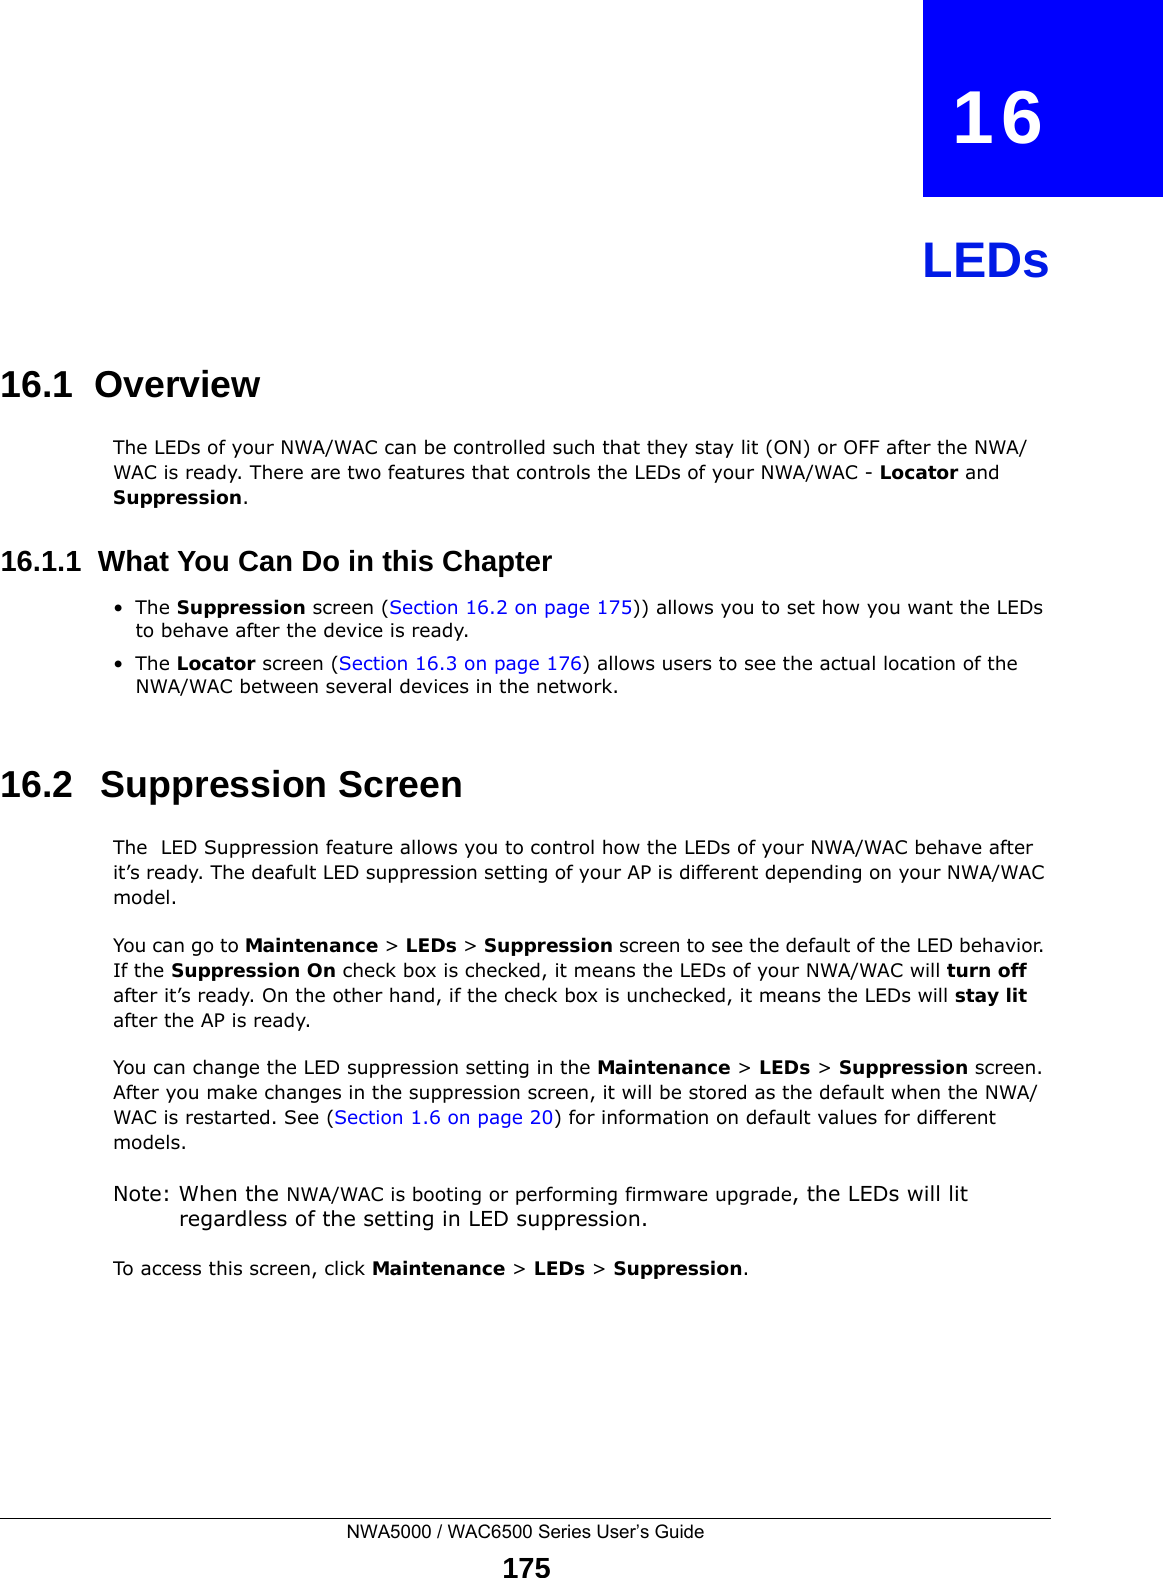 NWA5000 / WAC6500 Series User’s Guide175CHAPTER   16LEDs16.1  OverviewThe LEDs of your NWA/WAC can be controlled such that they stay lit (ON) or OFF after the NWA/WAC is ready. There are two features that controls the LEDs of your NWA/WAC - Locator and Suppression.16.1.1  What You Can Do in this Chapter•The Suppression screen (Section 16.2 on page 175)) allows you to set how you want the LEDs to behave after the device is ready. •The Locator screen (Section 16.3 on page 176) allows users to see the actual location of the NWA/WAC between several devices in the network.16.2   Suppression Screen The  LED Suppression feature allows you to control how the LEDs of your NWA/WAC behave after it’s ready. The deafult LED suppression setting of your AP is different depending on your NWA/WAC model. You can go to Maintenance &gt; LEDs &gt; Suppression screen to see the default of the LED behavior. If the Suppression On check box is checked, it means the LEDs of your NWA/WAC will turn off after it’s ready. On the other hand, if the check box is unchecked, it means the LEDs will stay lit after the AP is ready. You can change the LED suppression setting in the Maintenance &gt; LEDs &gt; Suppression screen. After you make changes in the suppression screen, it will be stored as the default when the NWA/WAC is restarted. See (Section 1.6 on page 20) for information on default values for different models.Note: When the NWA/WAC is booting or performing firmware upgrade, the LEDs will lit regardless of the setting in LED suppression.To access this screen, click Maintenance &gt; LEDs &gt; Suppression.